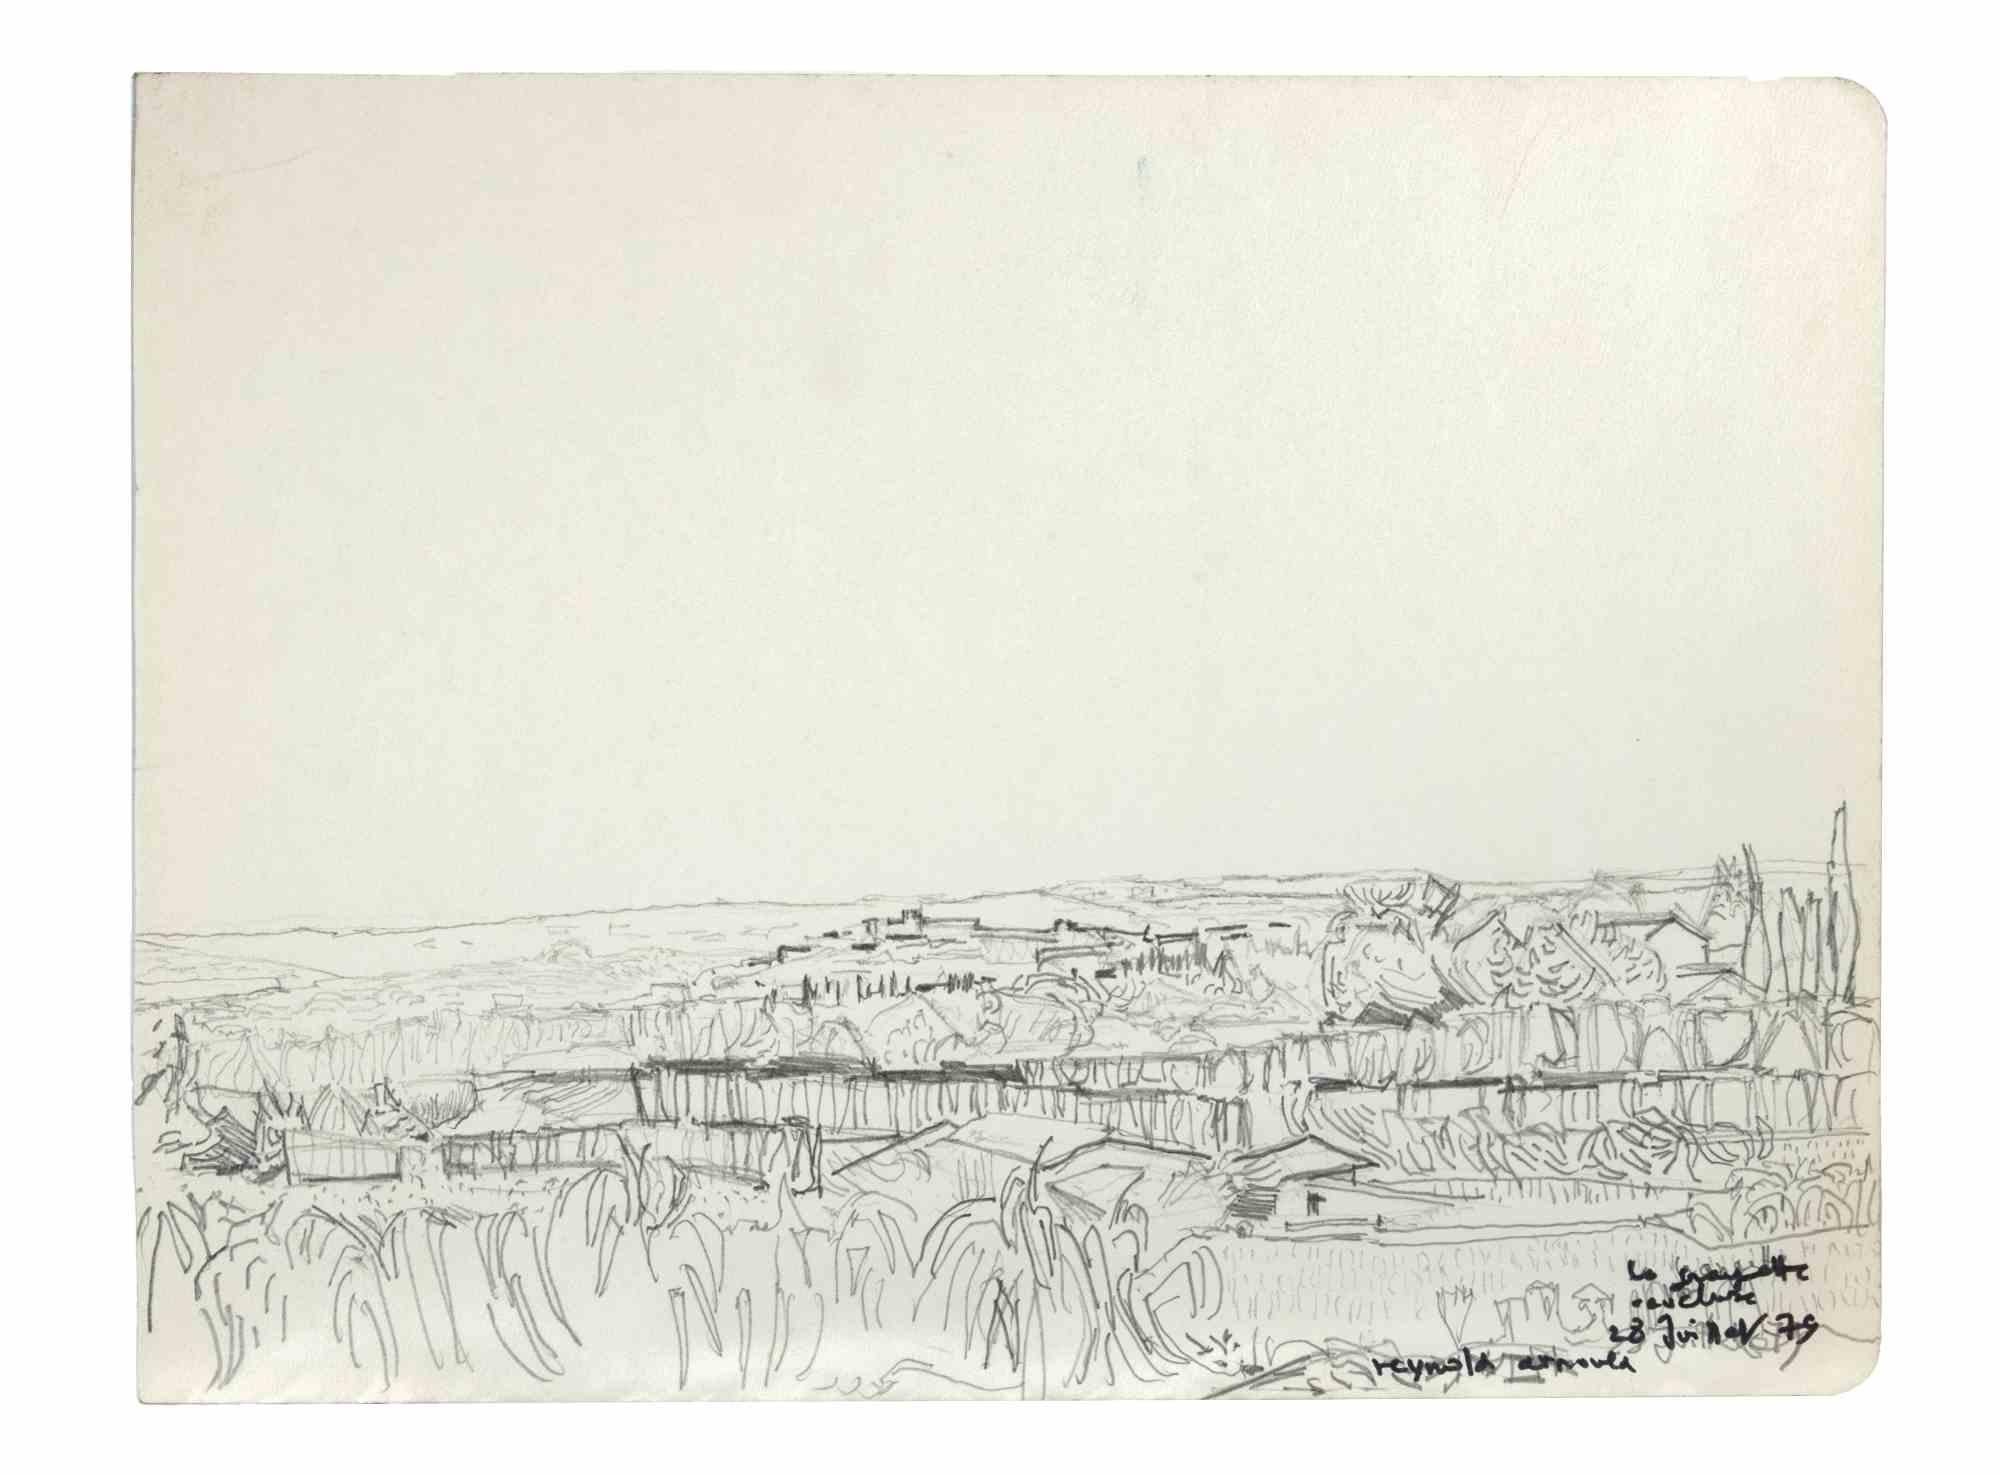 Countryscape is a pencil drawing realized by  Reynold Arnould  (Le Havre 1919 - Parigi 1980).

Good condition.

Signature, dated and titled on the lower right corner..

Reynold Arnould was born in Le Havre, France in 1919. He studied at l'École des